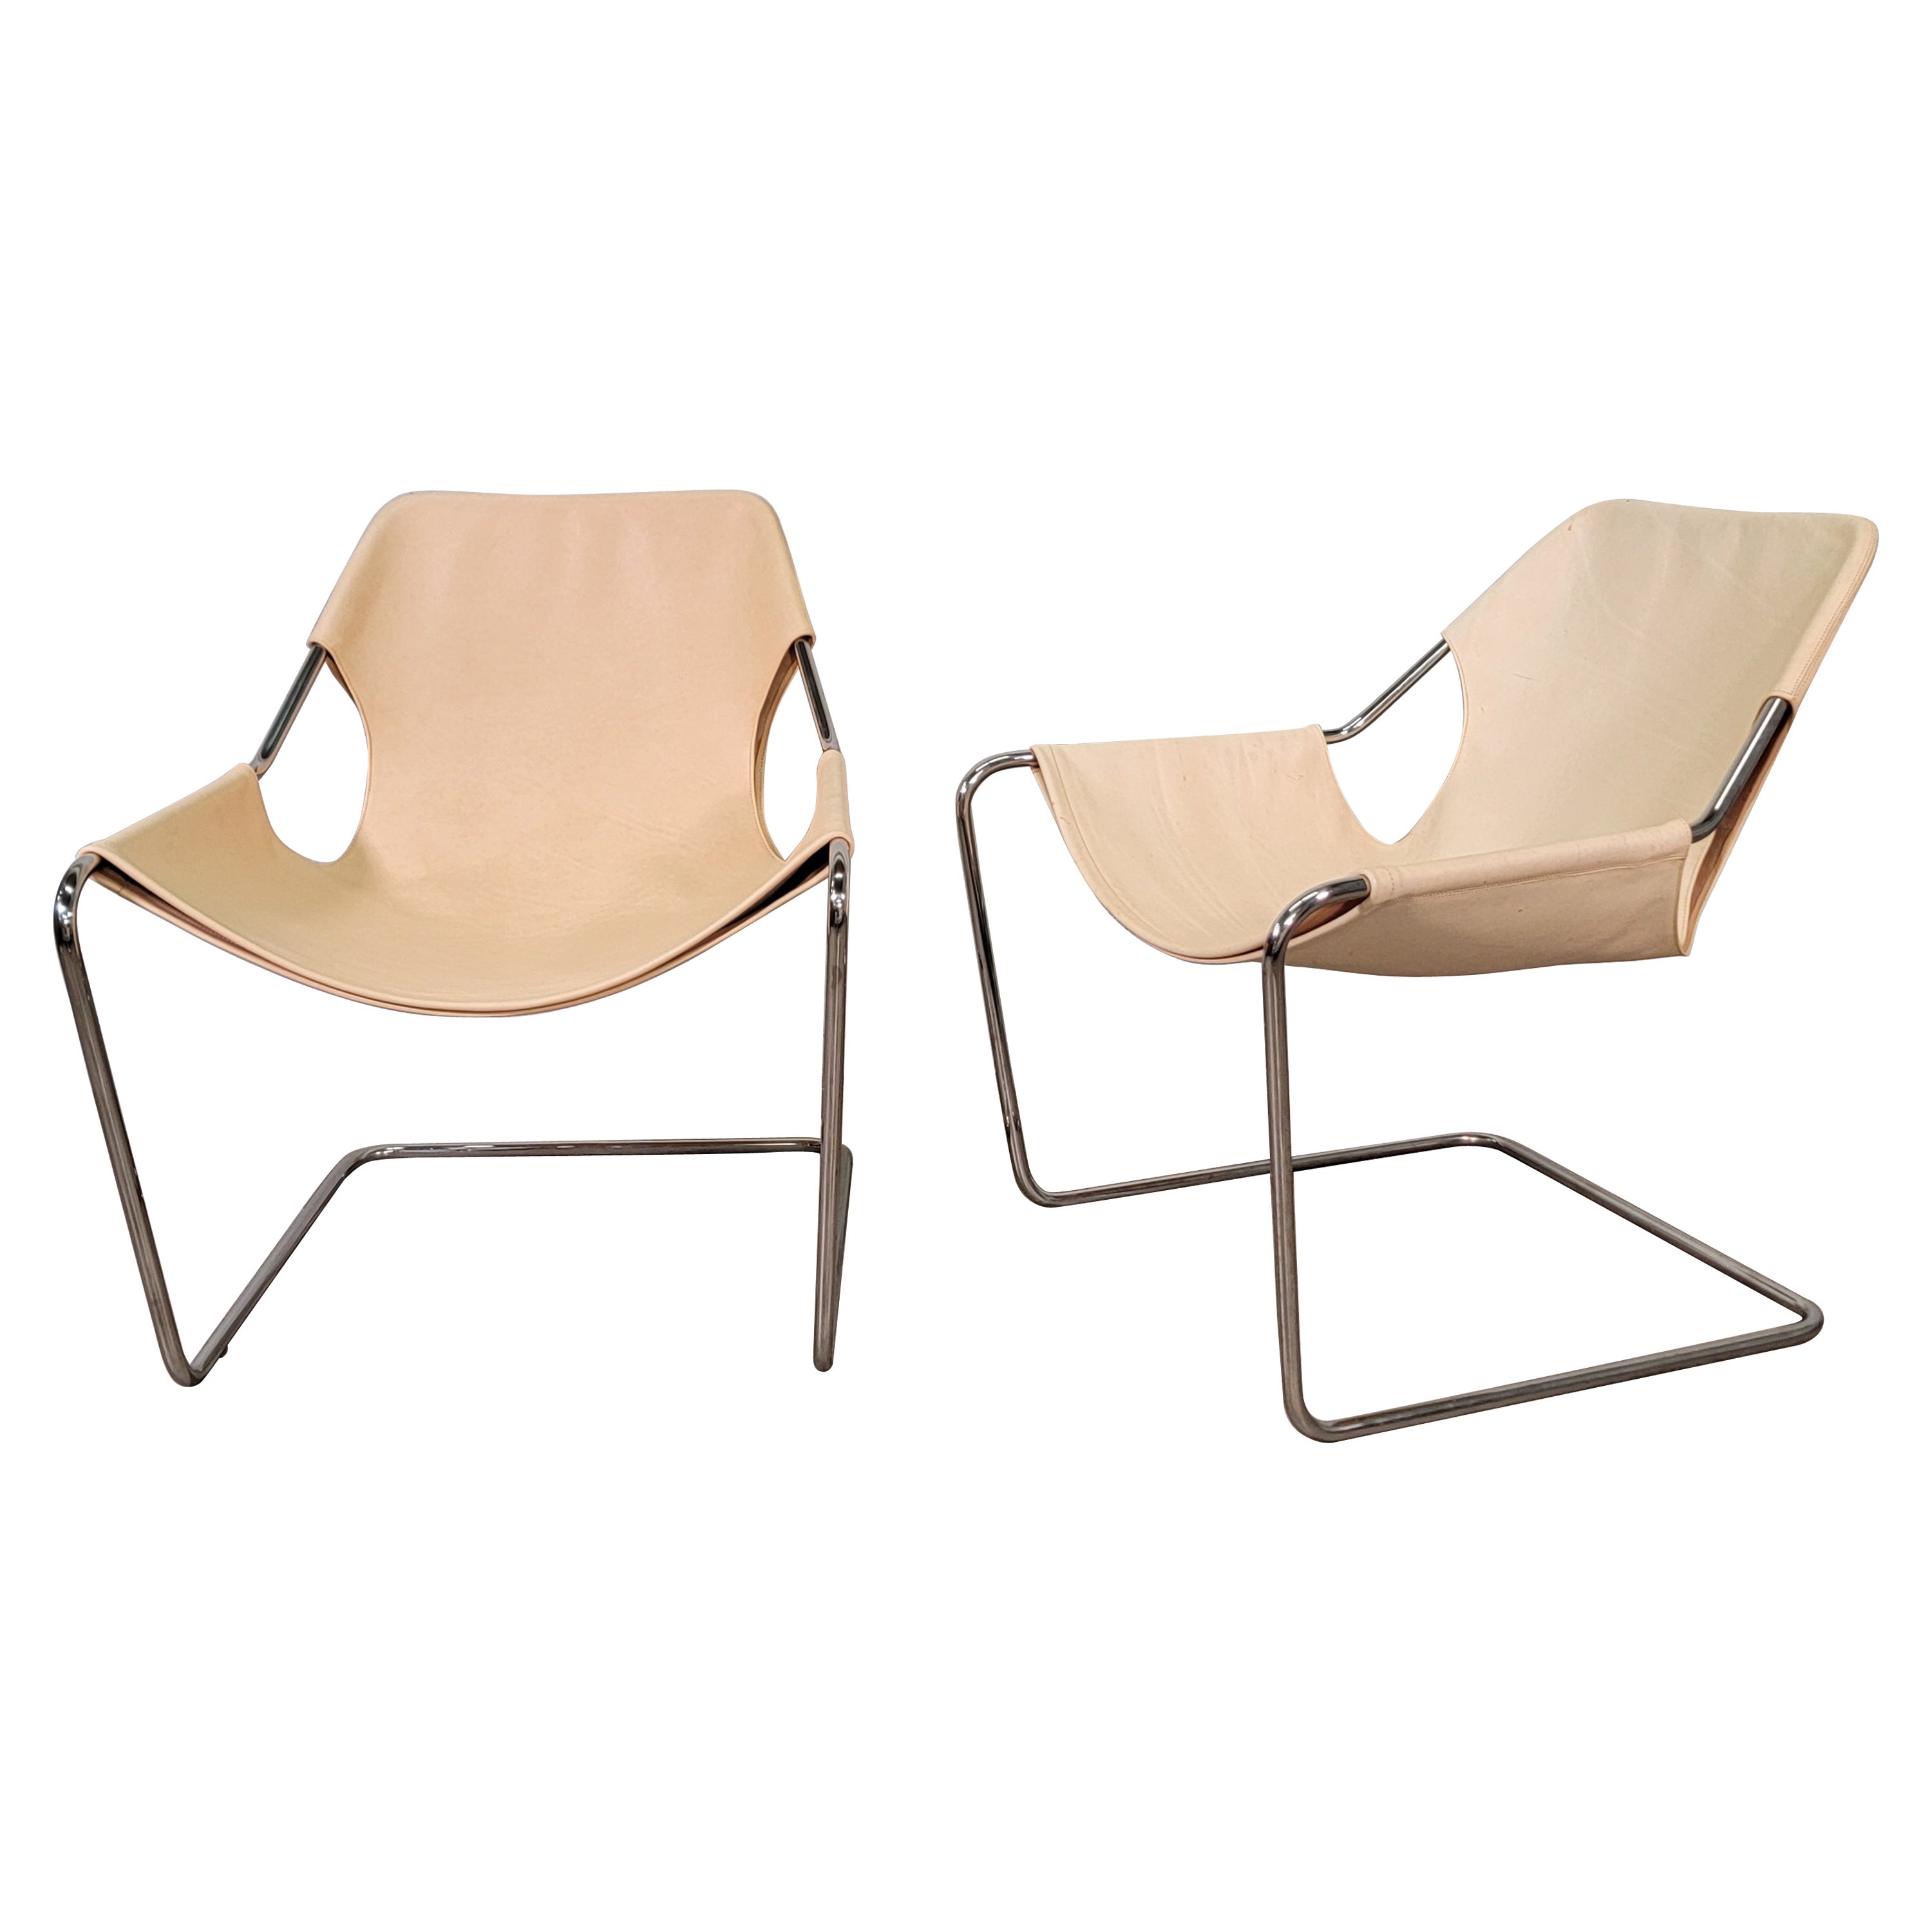 Paulistano Natural Leather Sling Armchairs - a Pair For Sale